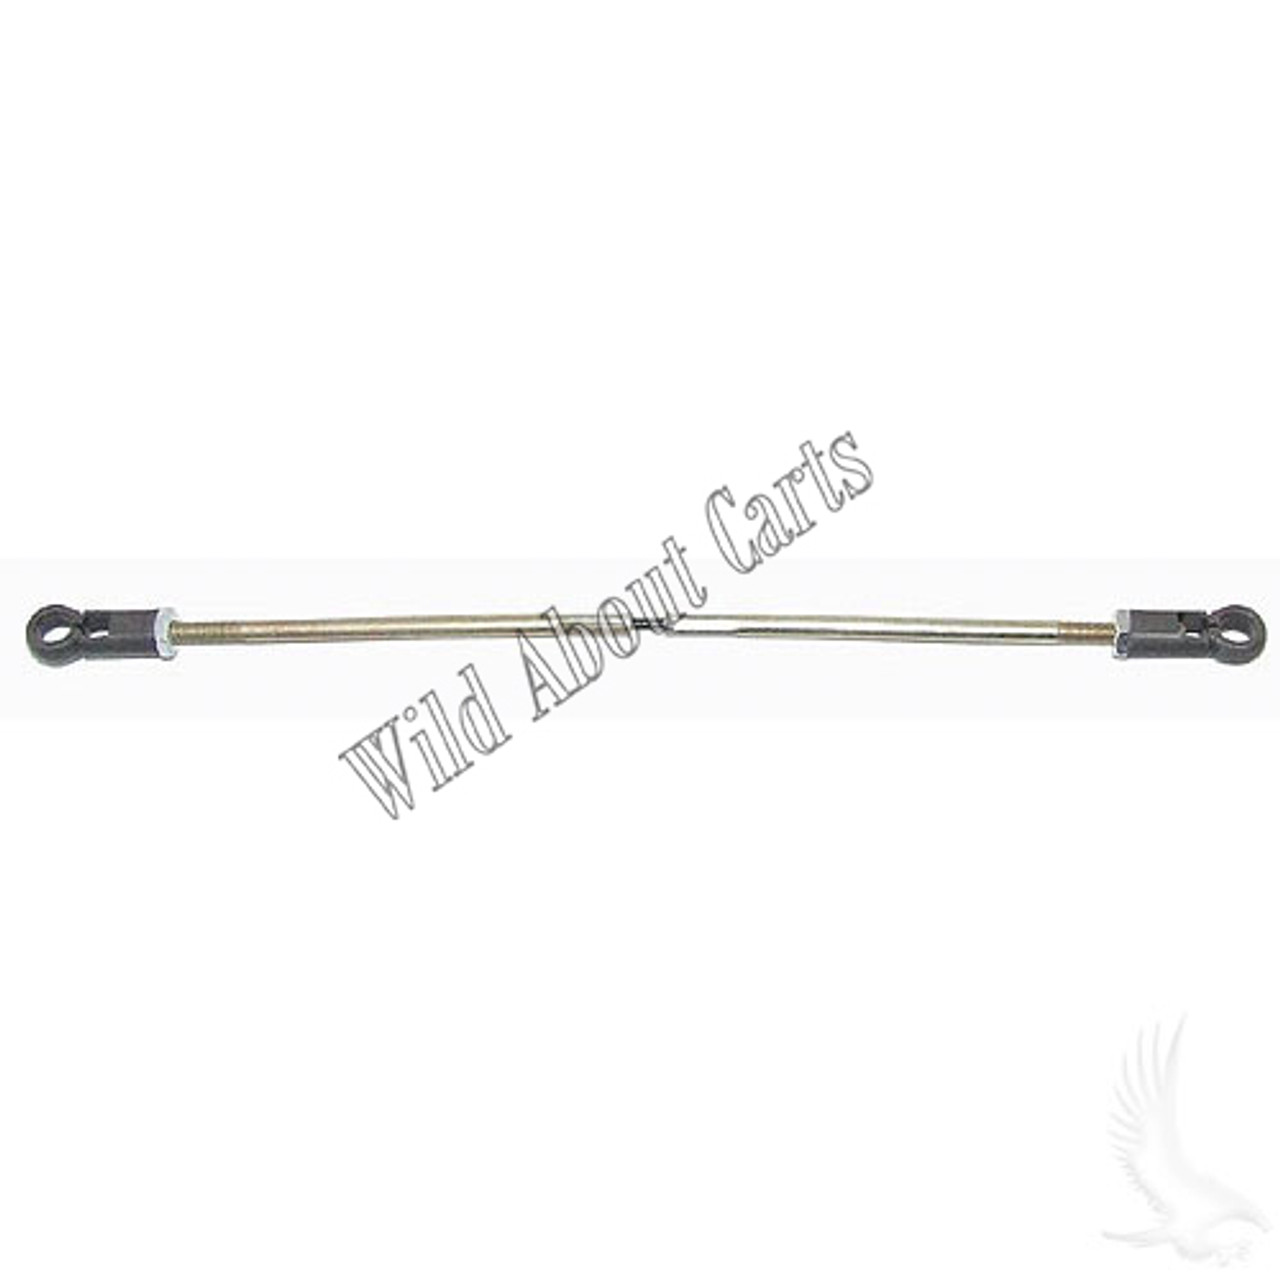 Throttle Linkage Rod for EZGO Golf Cart 4-Cycle Gas 1991-Up, ENG-101, 25737G02, 72254G01, 5576